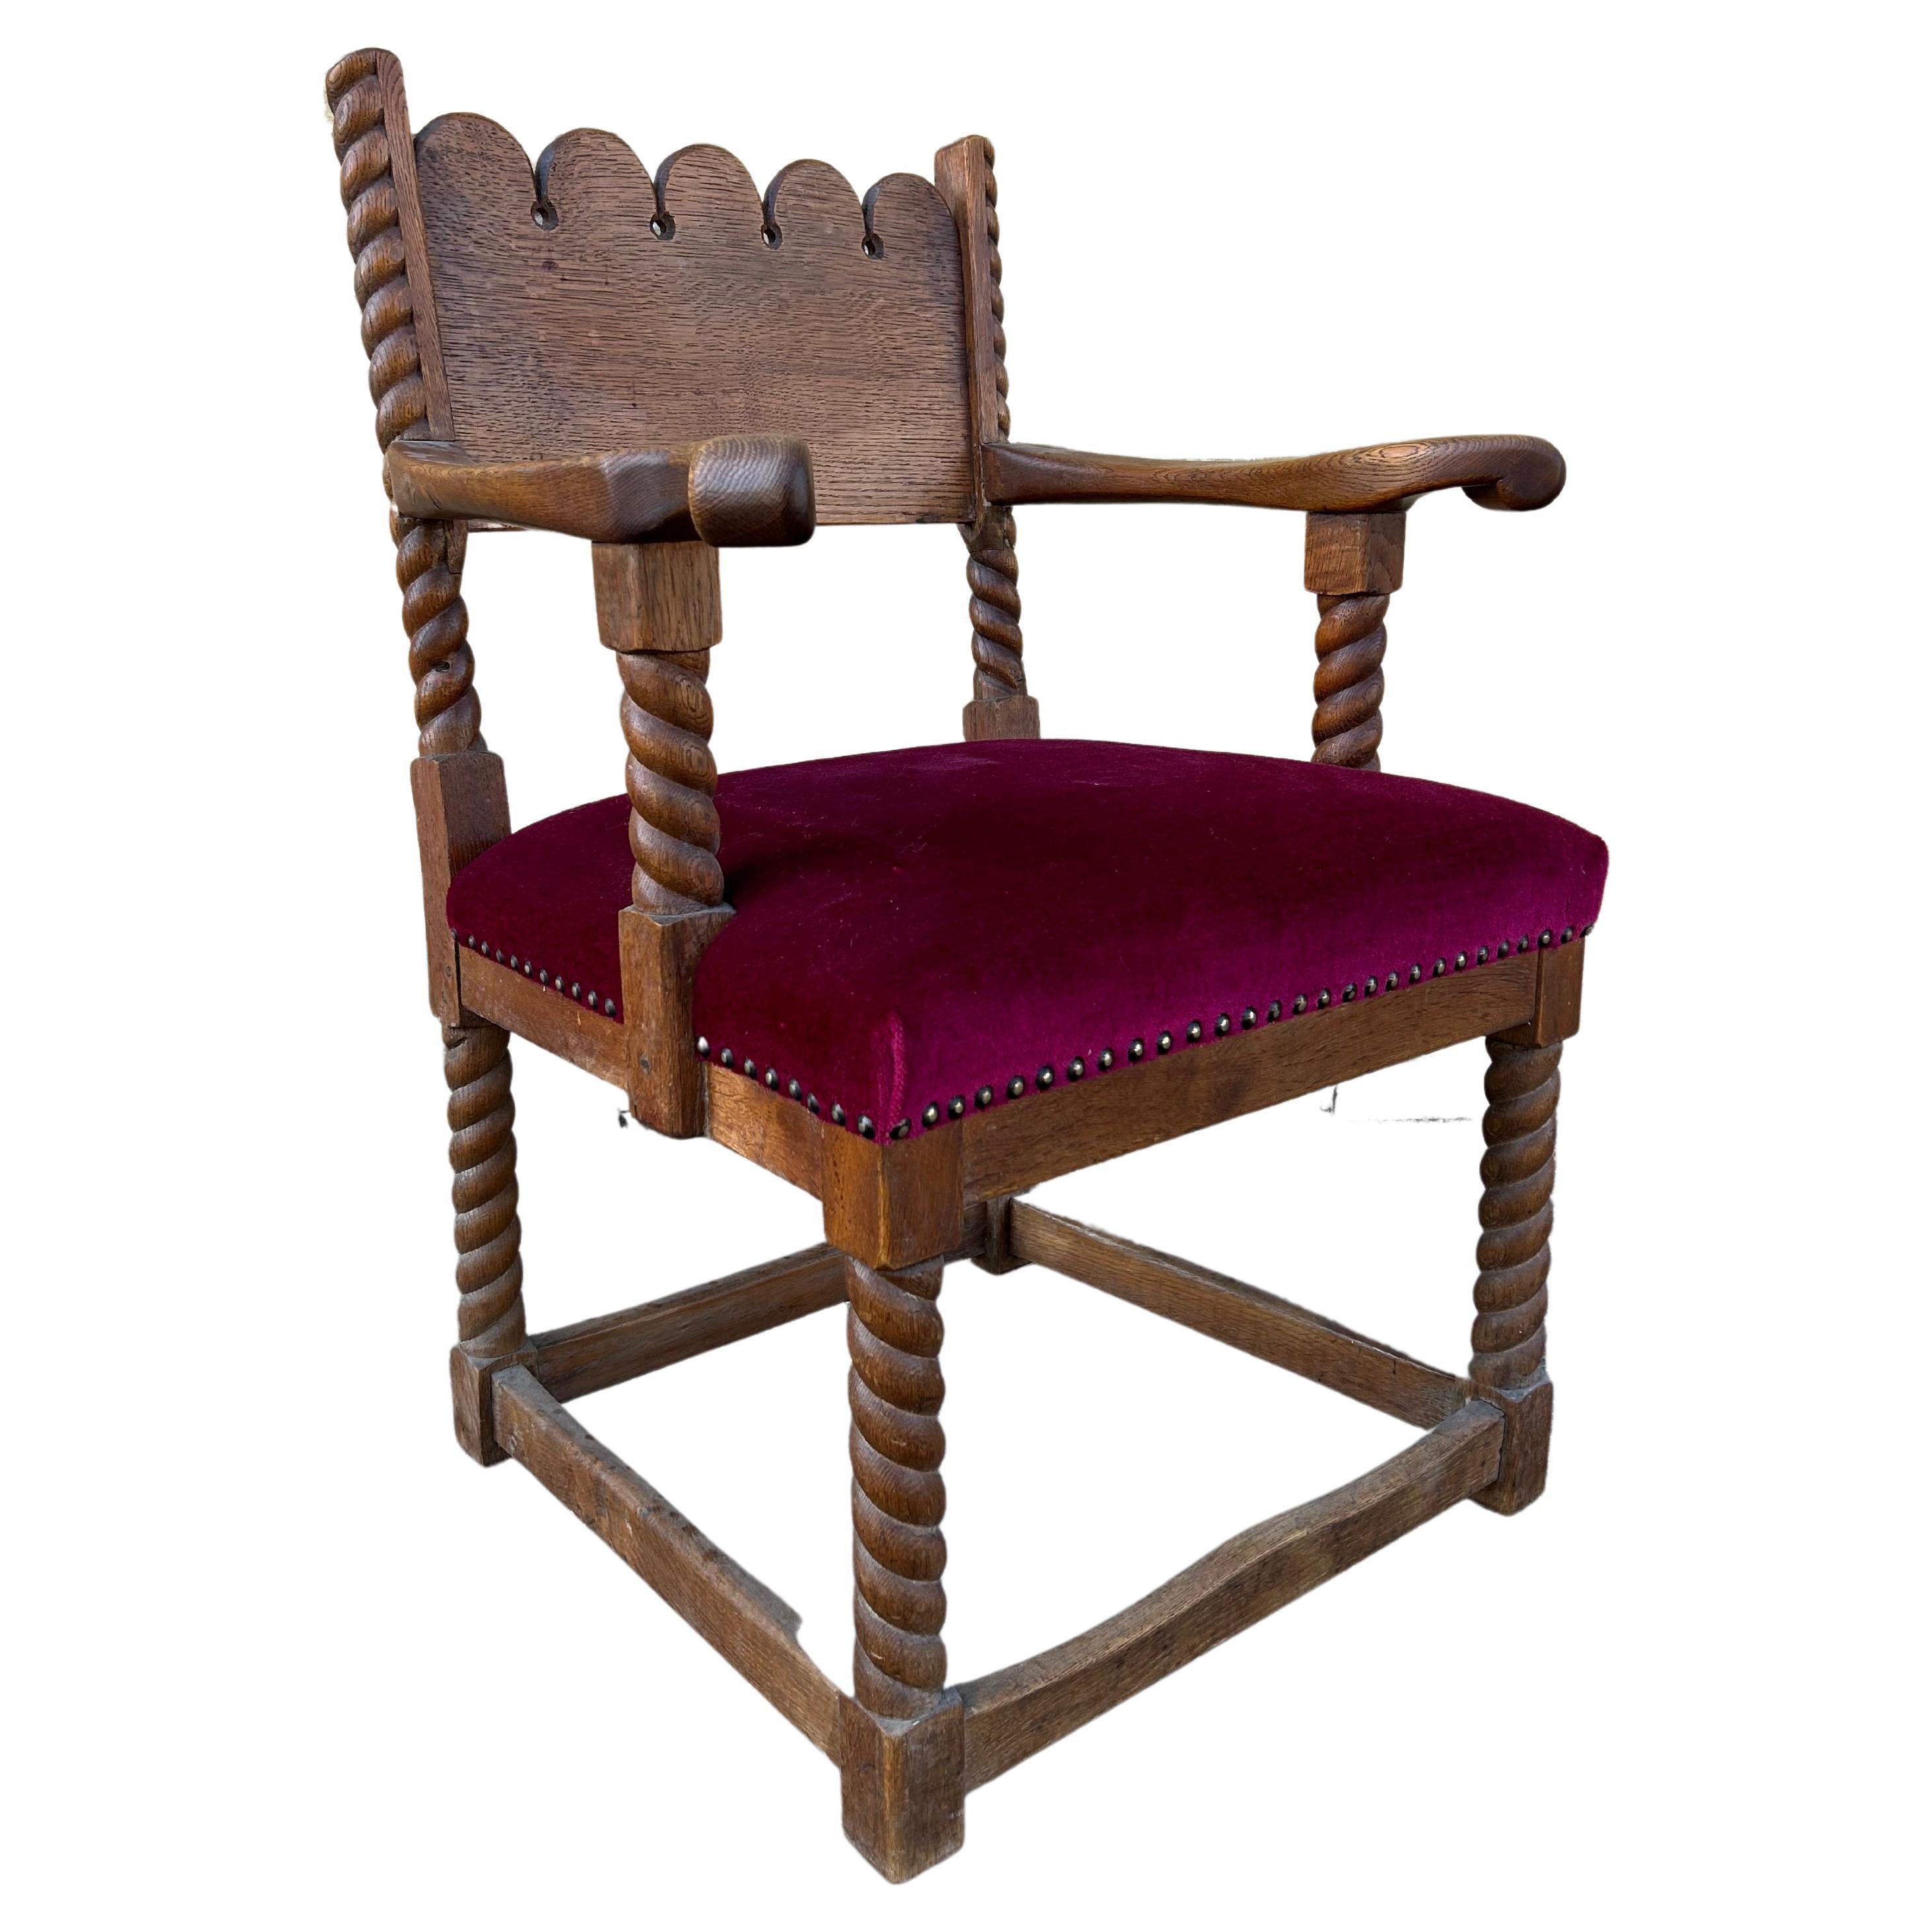 Sculptural Arts and Crafts Oak Arm Chair, Denmark 1920’s For Sale